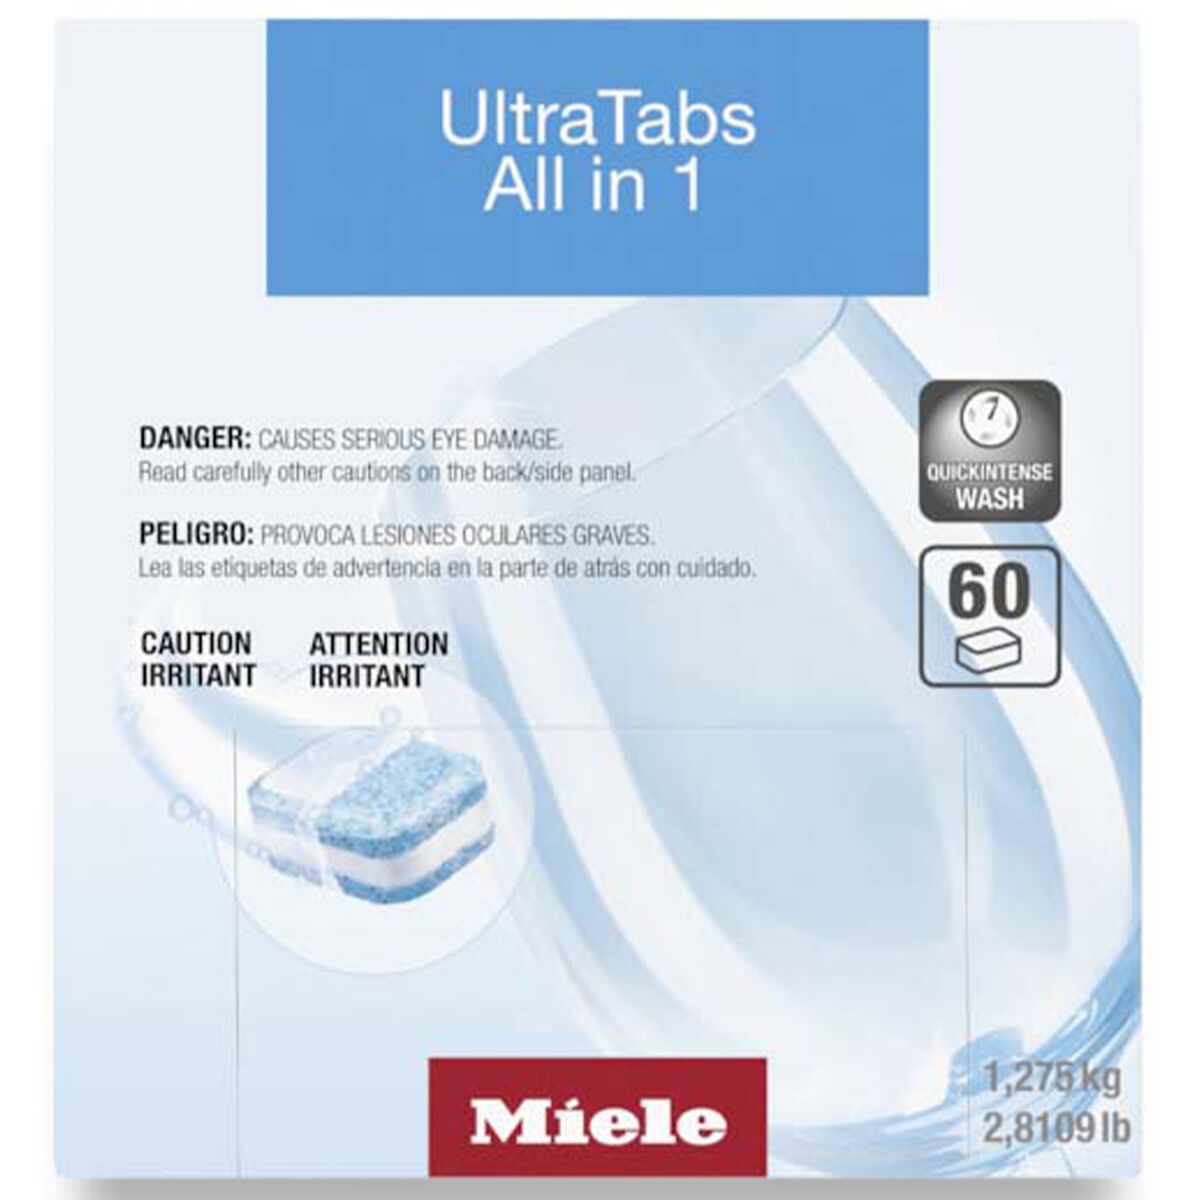 Miele UltraTabs All In 1 for Dishwashers (60 count) | P.C. Richard 